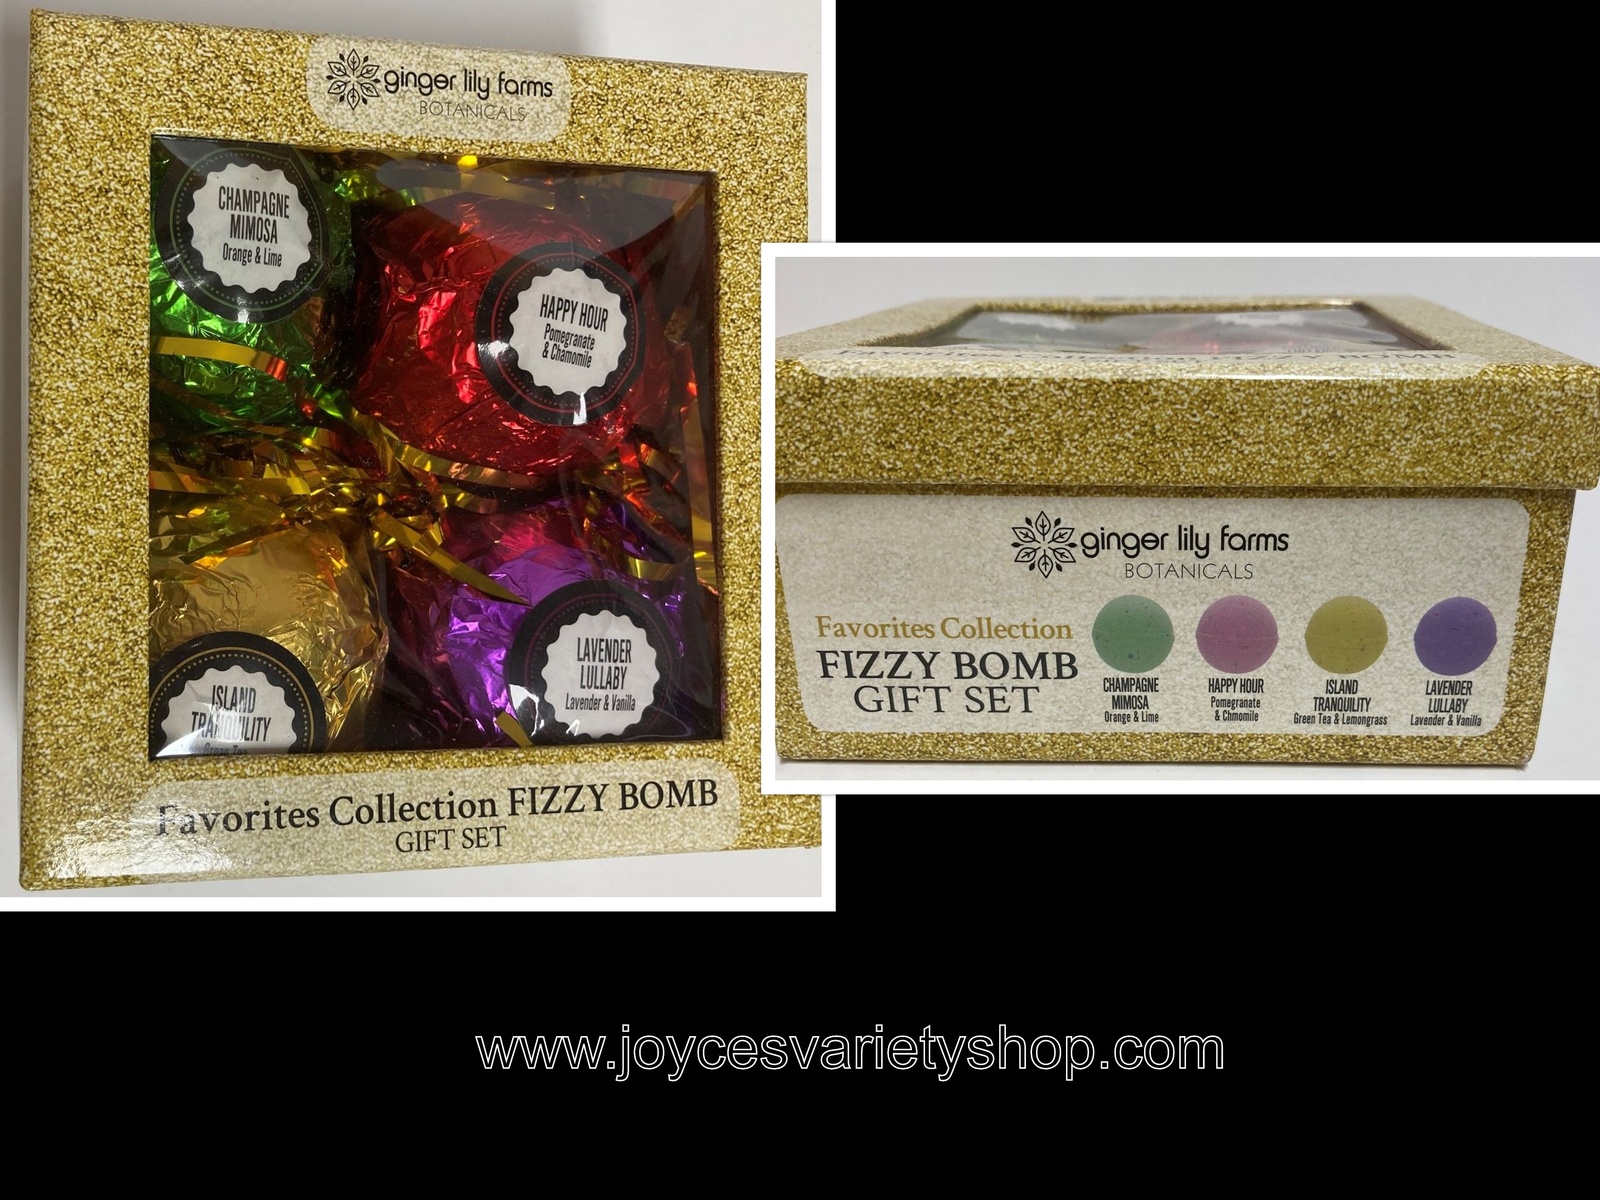 Fizzy Bomb Bath Gift Set Ginger Lily Farms Botanicals Happy Hour Set of 4